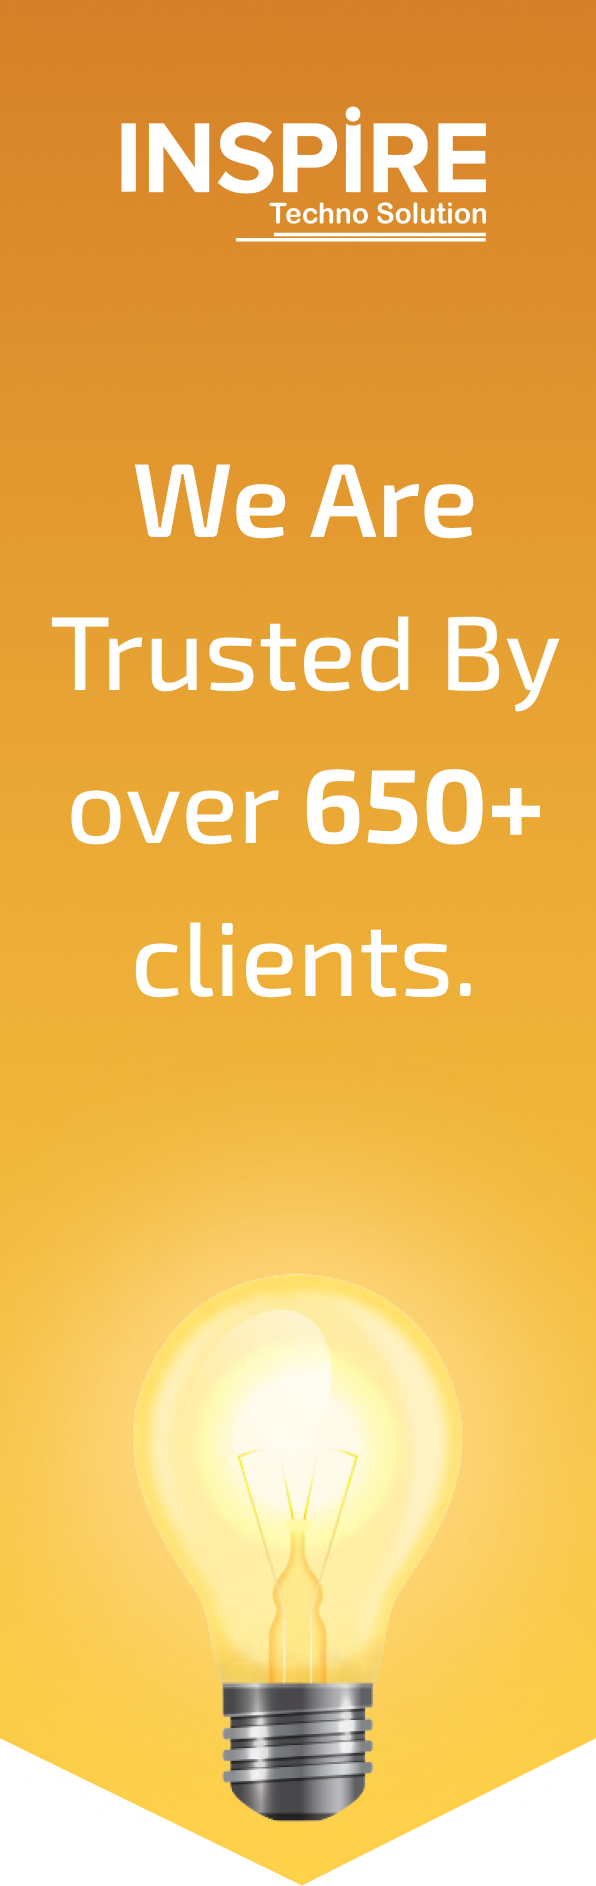 We are trusted by over 650+ clients.